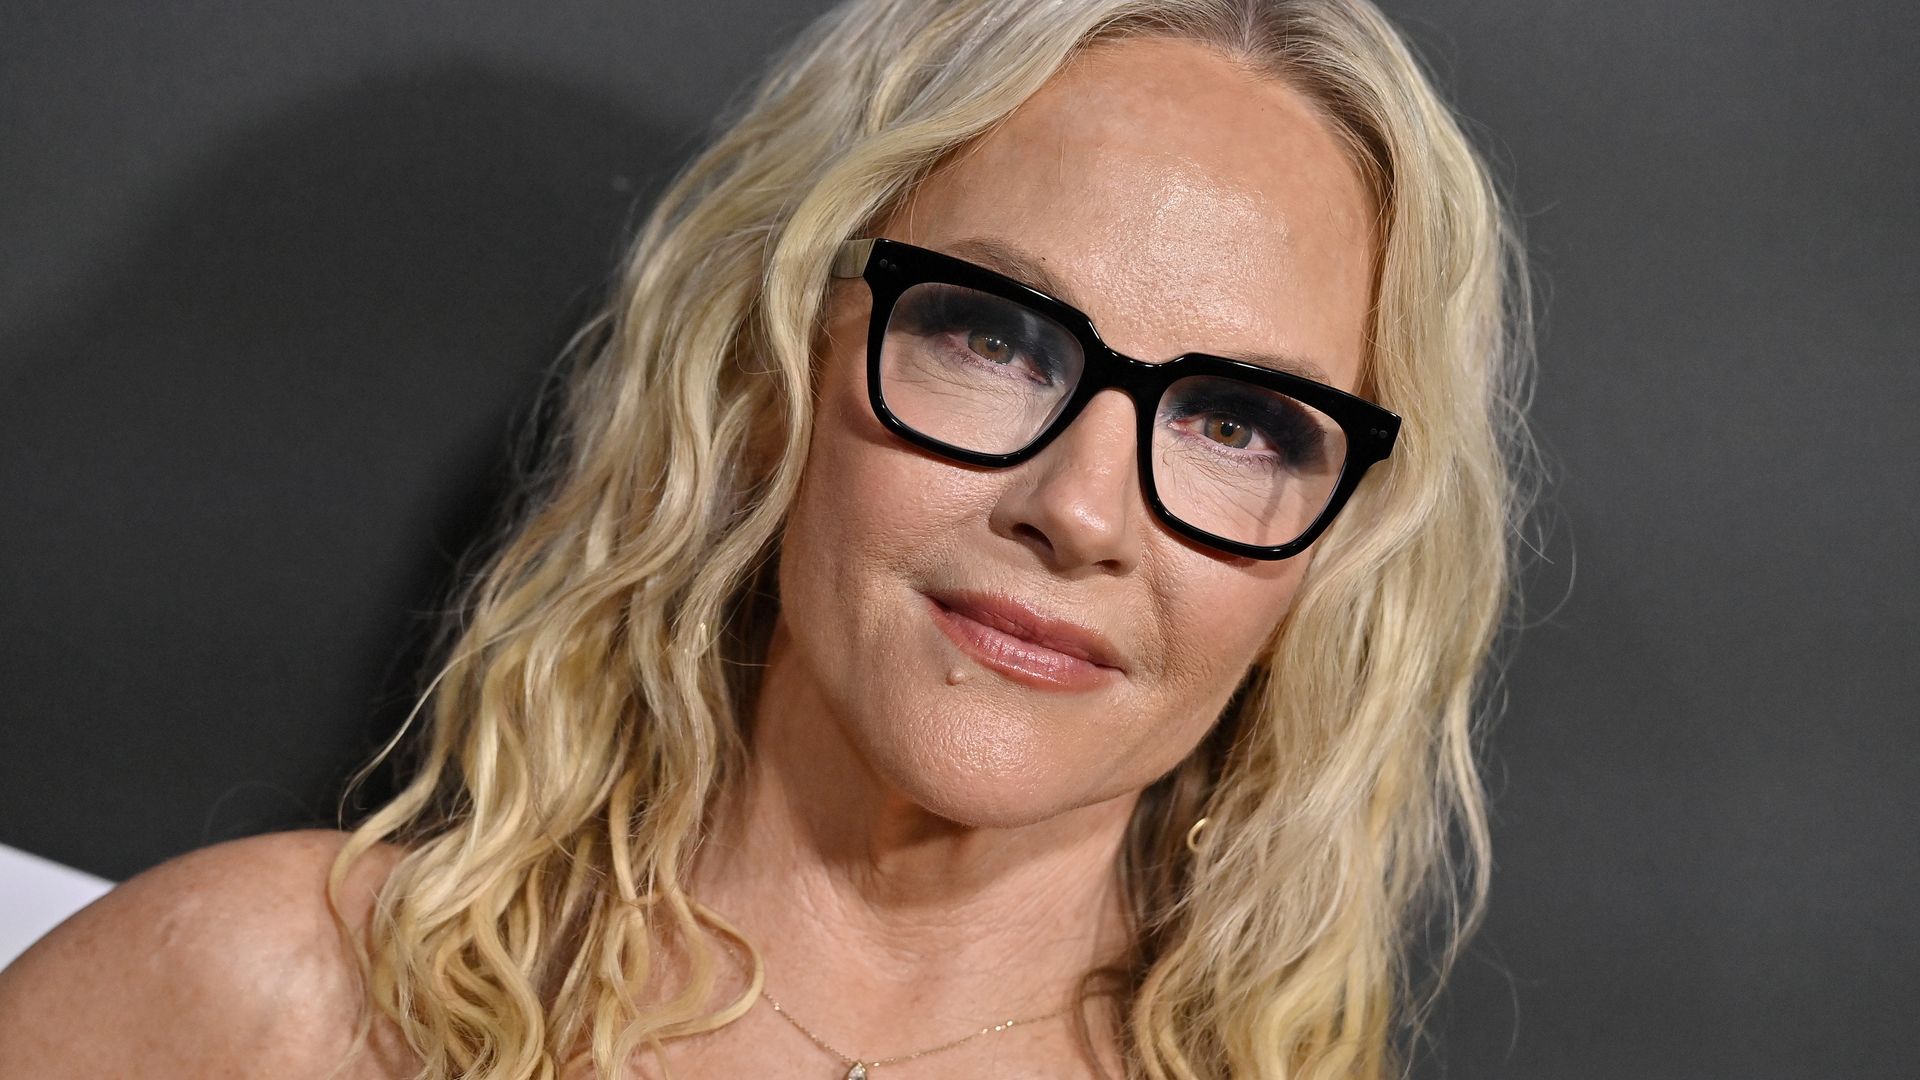 Rachael Harris attends the 2023 WIF Honors at The Ray Dolby Ballroom on November 30, 2023 in Hollywood, California. (Photo by Axelle/Bauer-Griffin/FilmMagic)